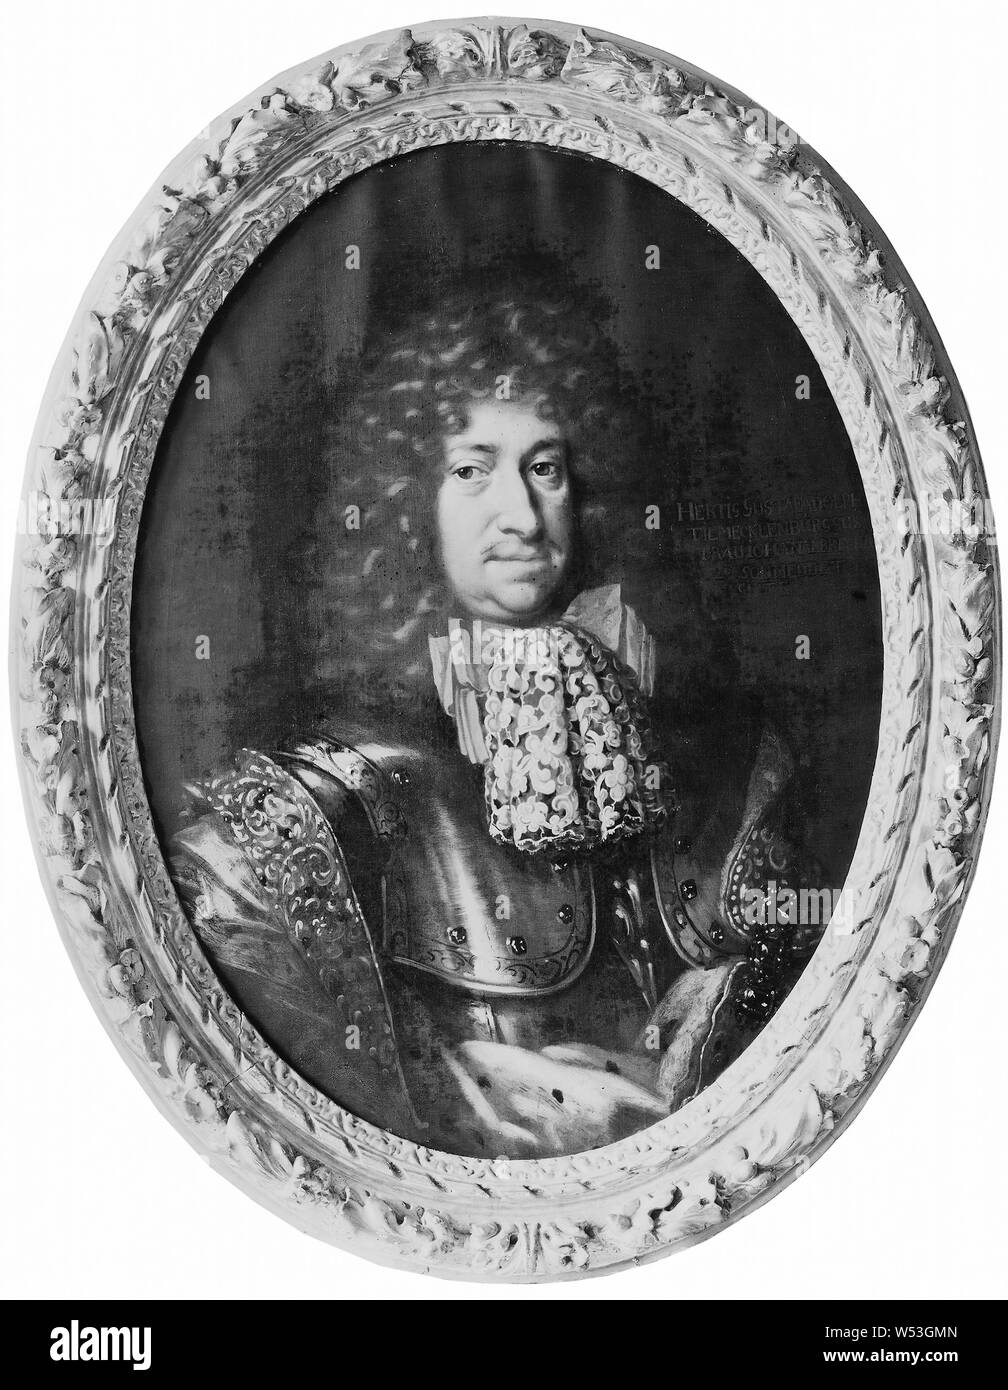 Attributed to David von Krafft, Gustav Adolf, 1633-1695, Duke of Mecklenburg-Gustrow, painting, Oil on canvas, Height, 83 cm (32.6 inches), Width, 64 cm (25.1), inches) Stock Photo